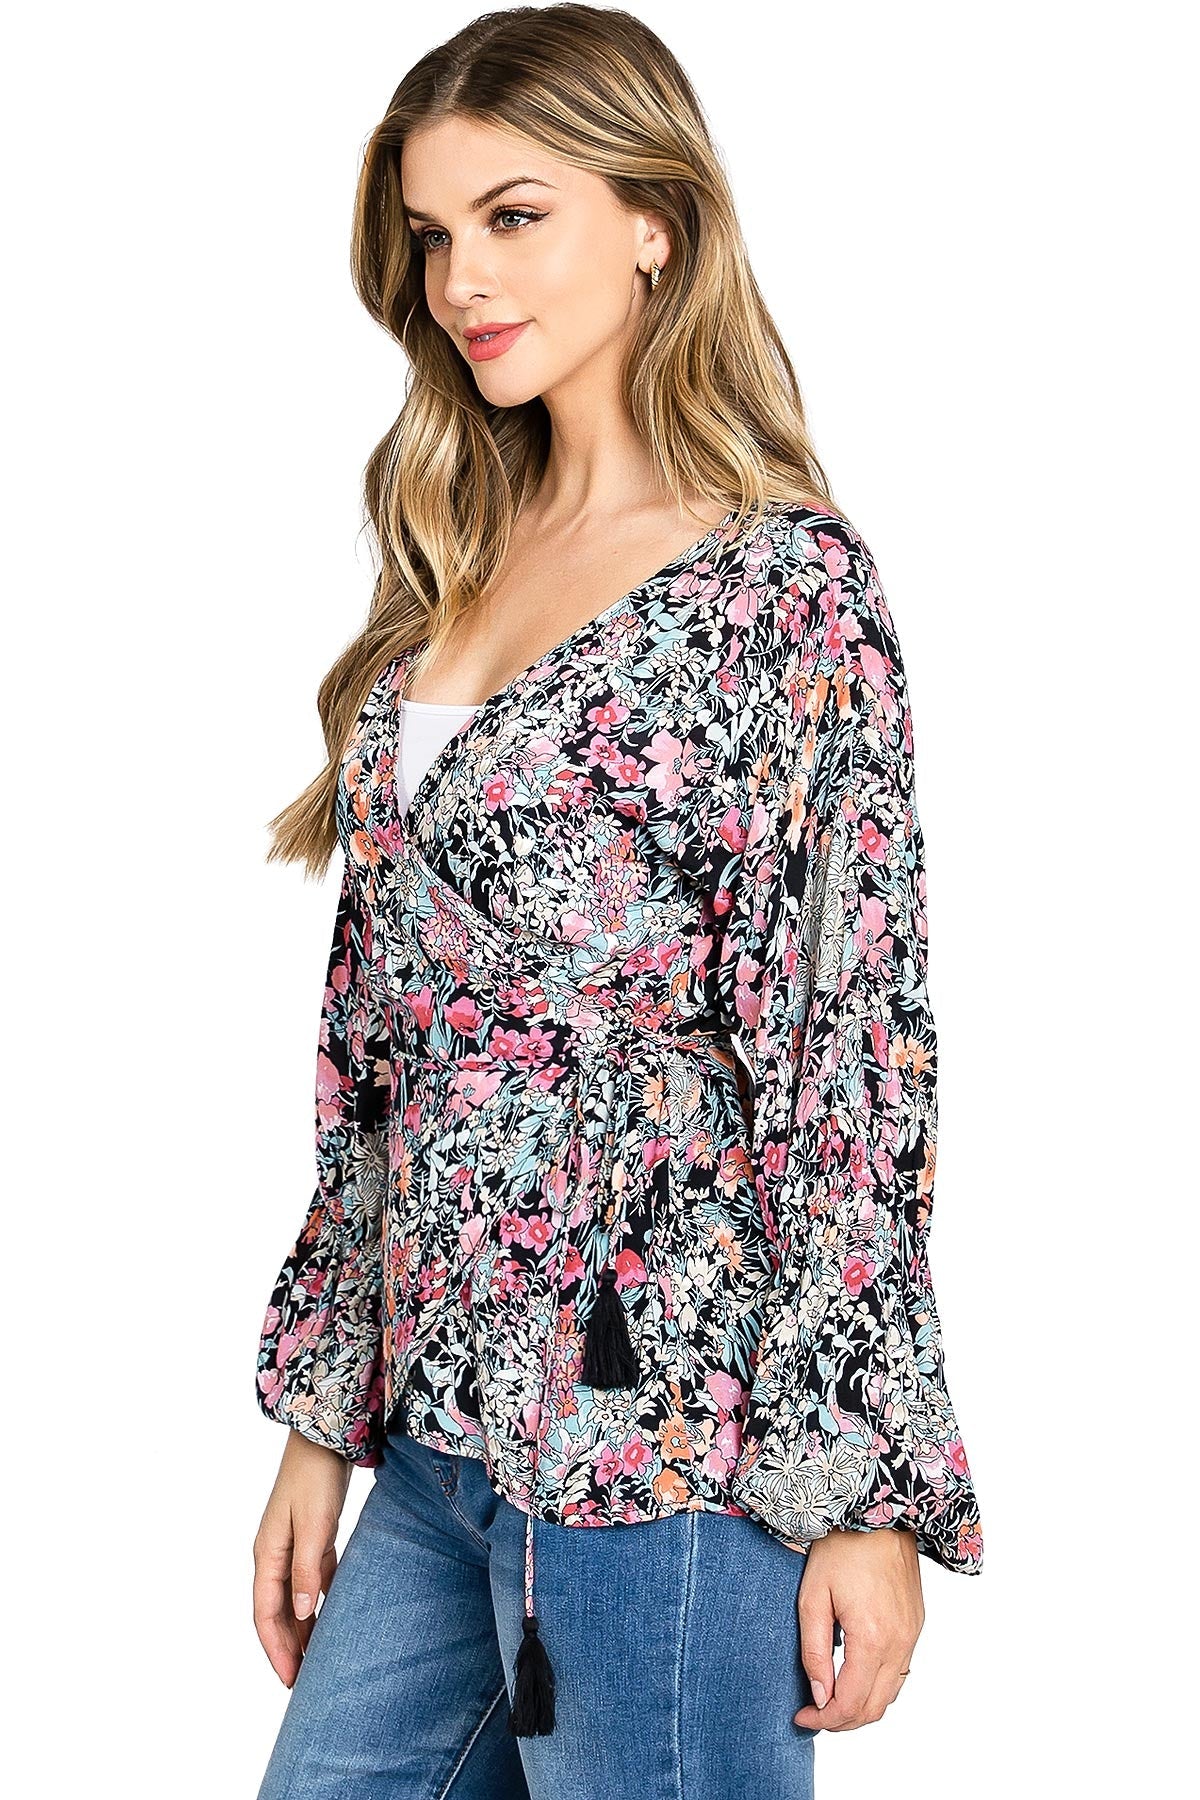 Neo Floral Blouse